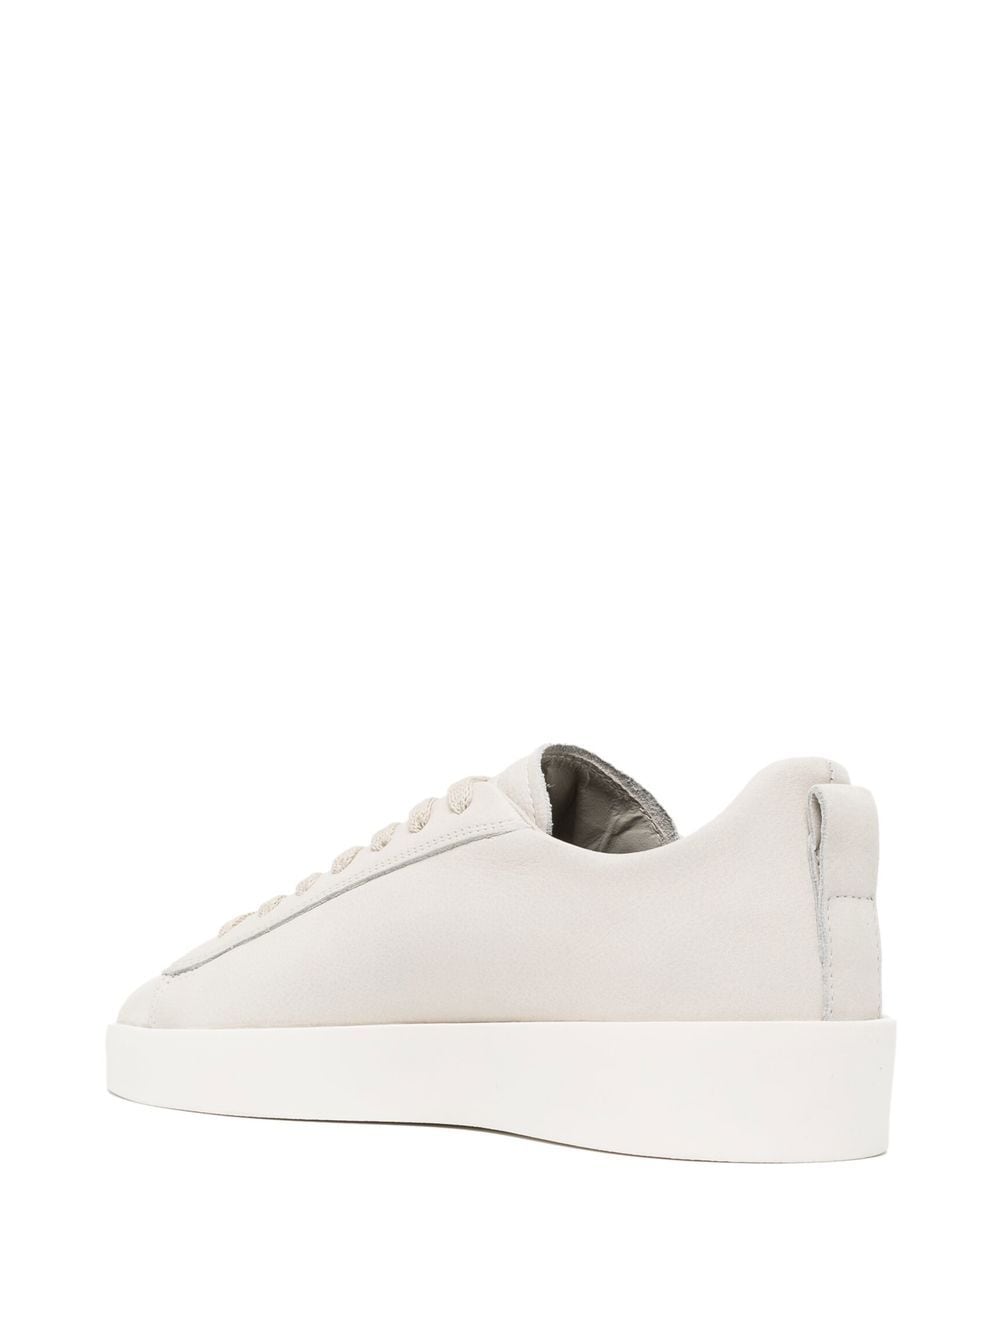 FEAR OF GOD ESSENTIALS low-top lace-up Trainers - Farfetch